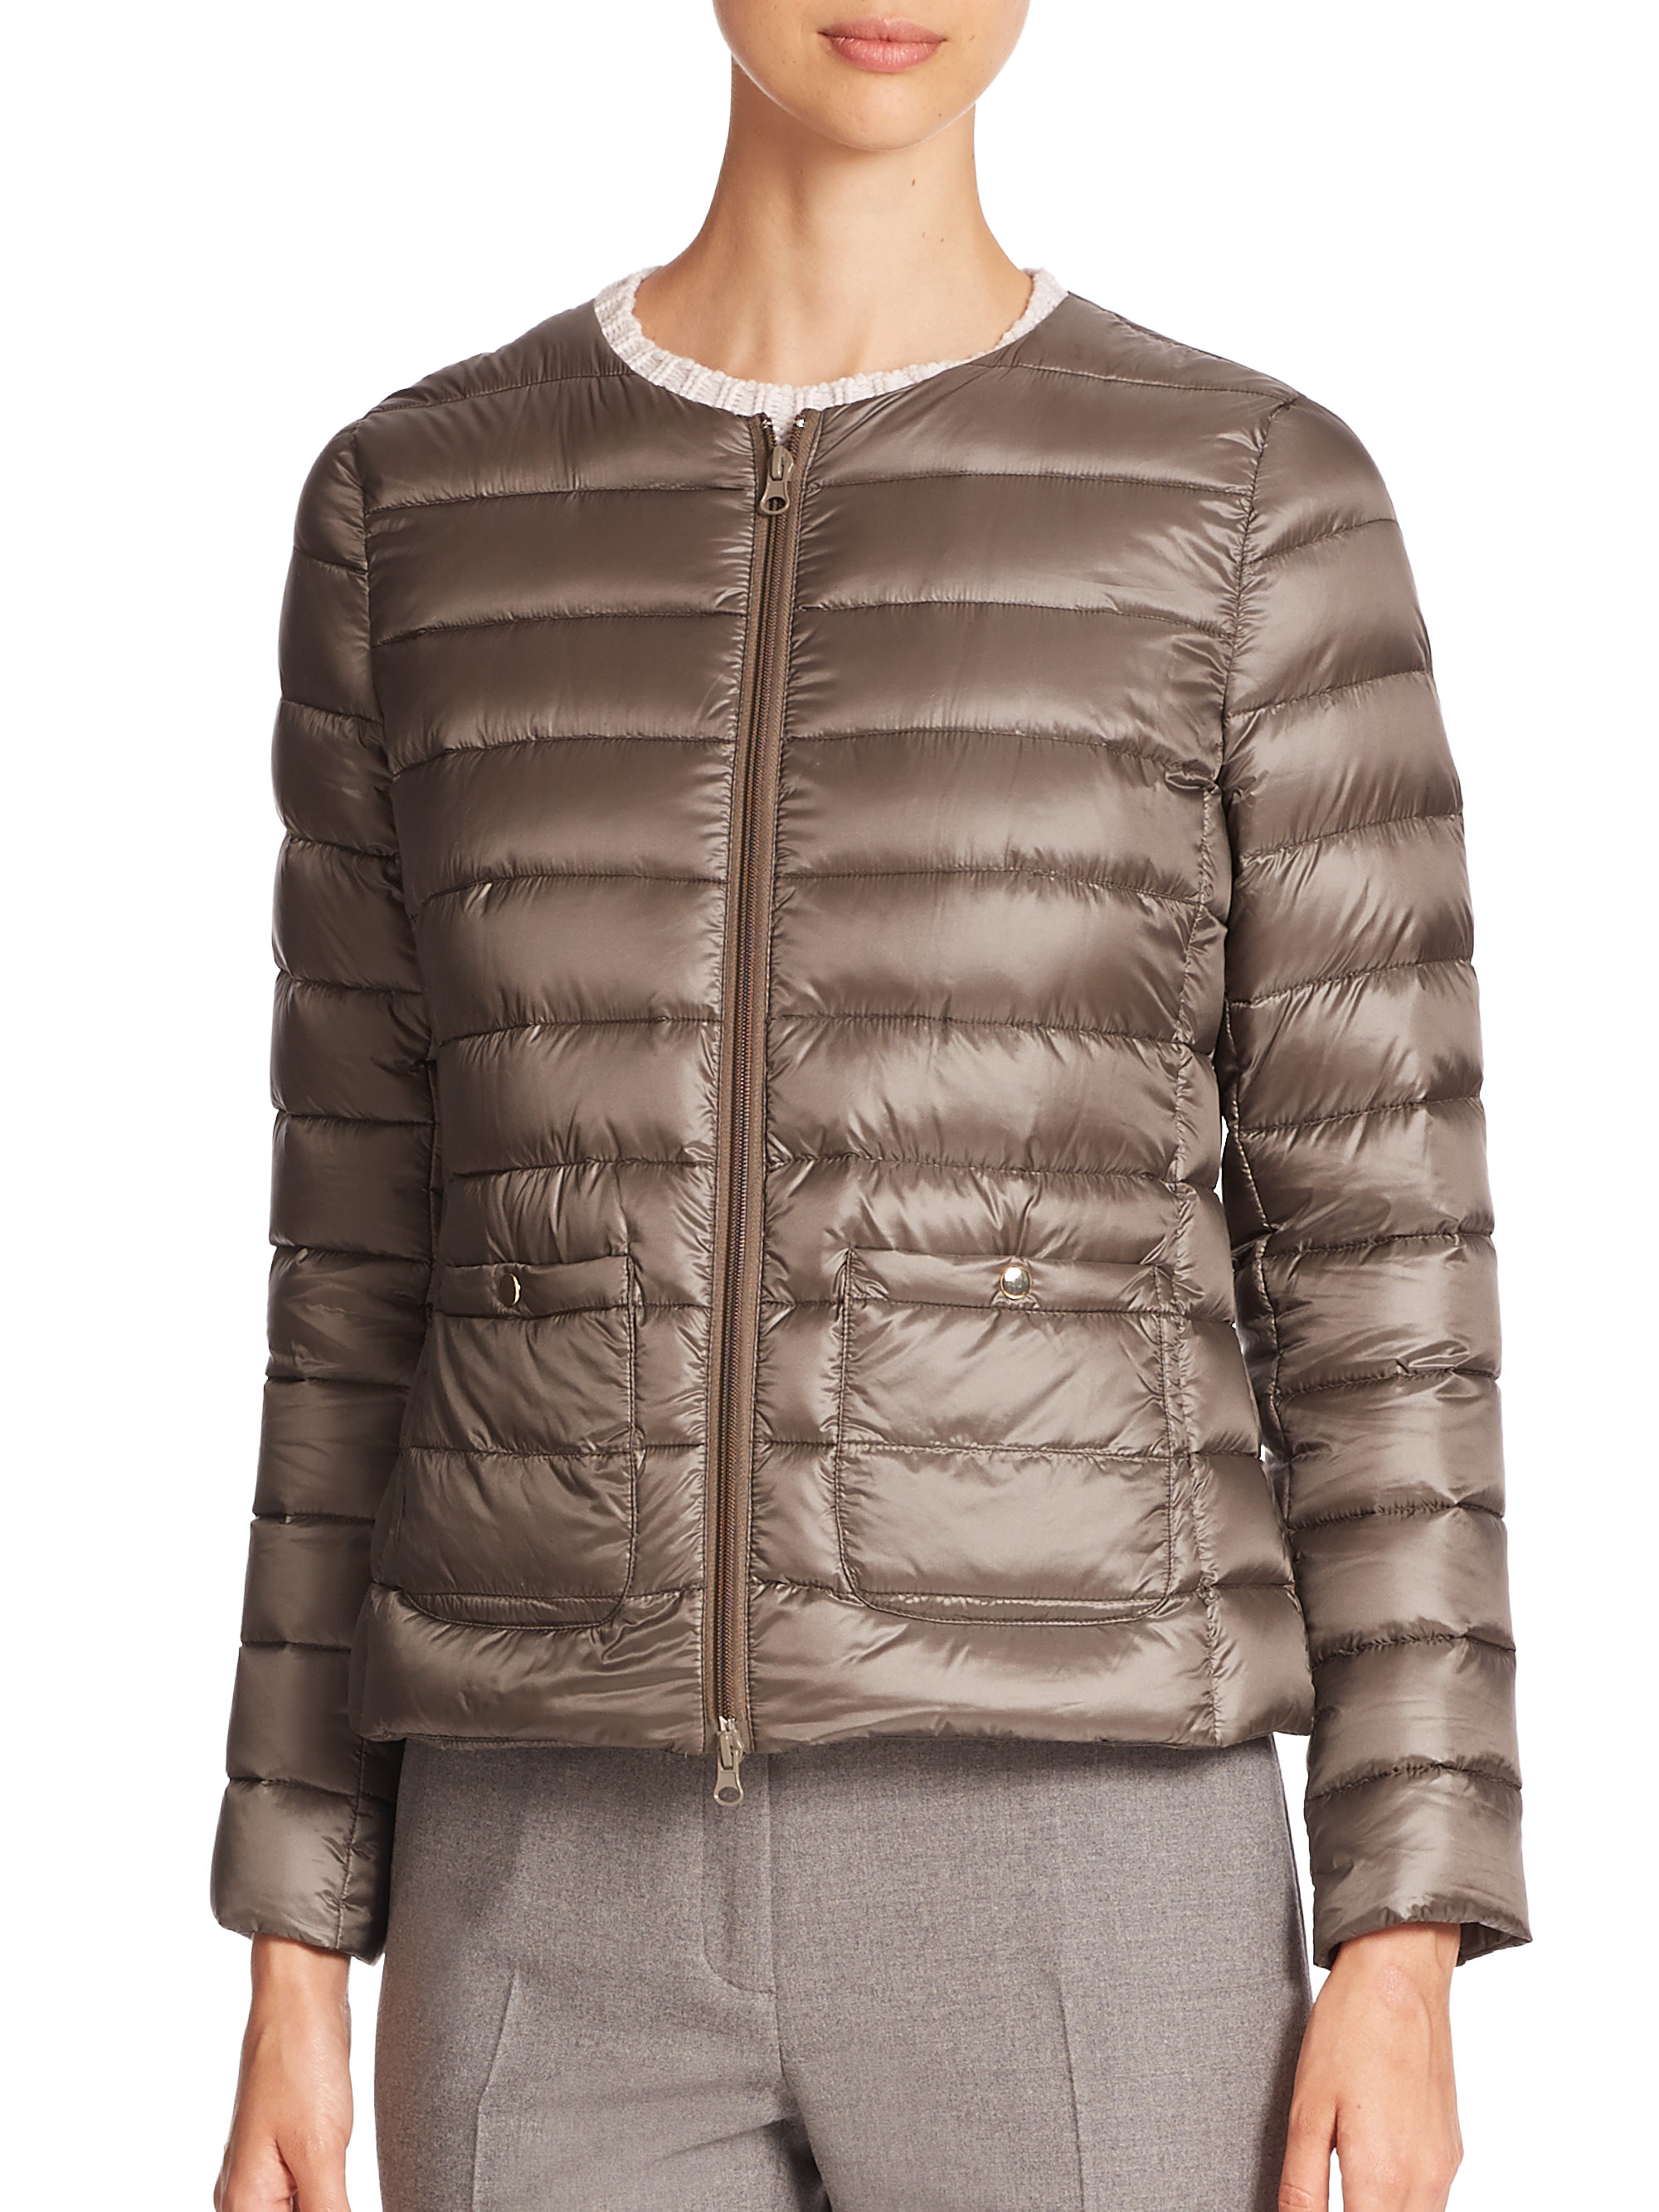 Peserico Short Puffer Jacket in Brown - Lyst